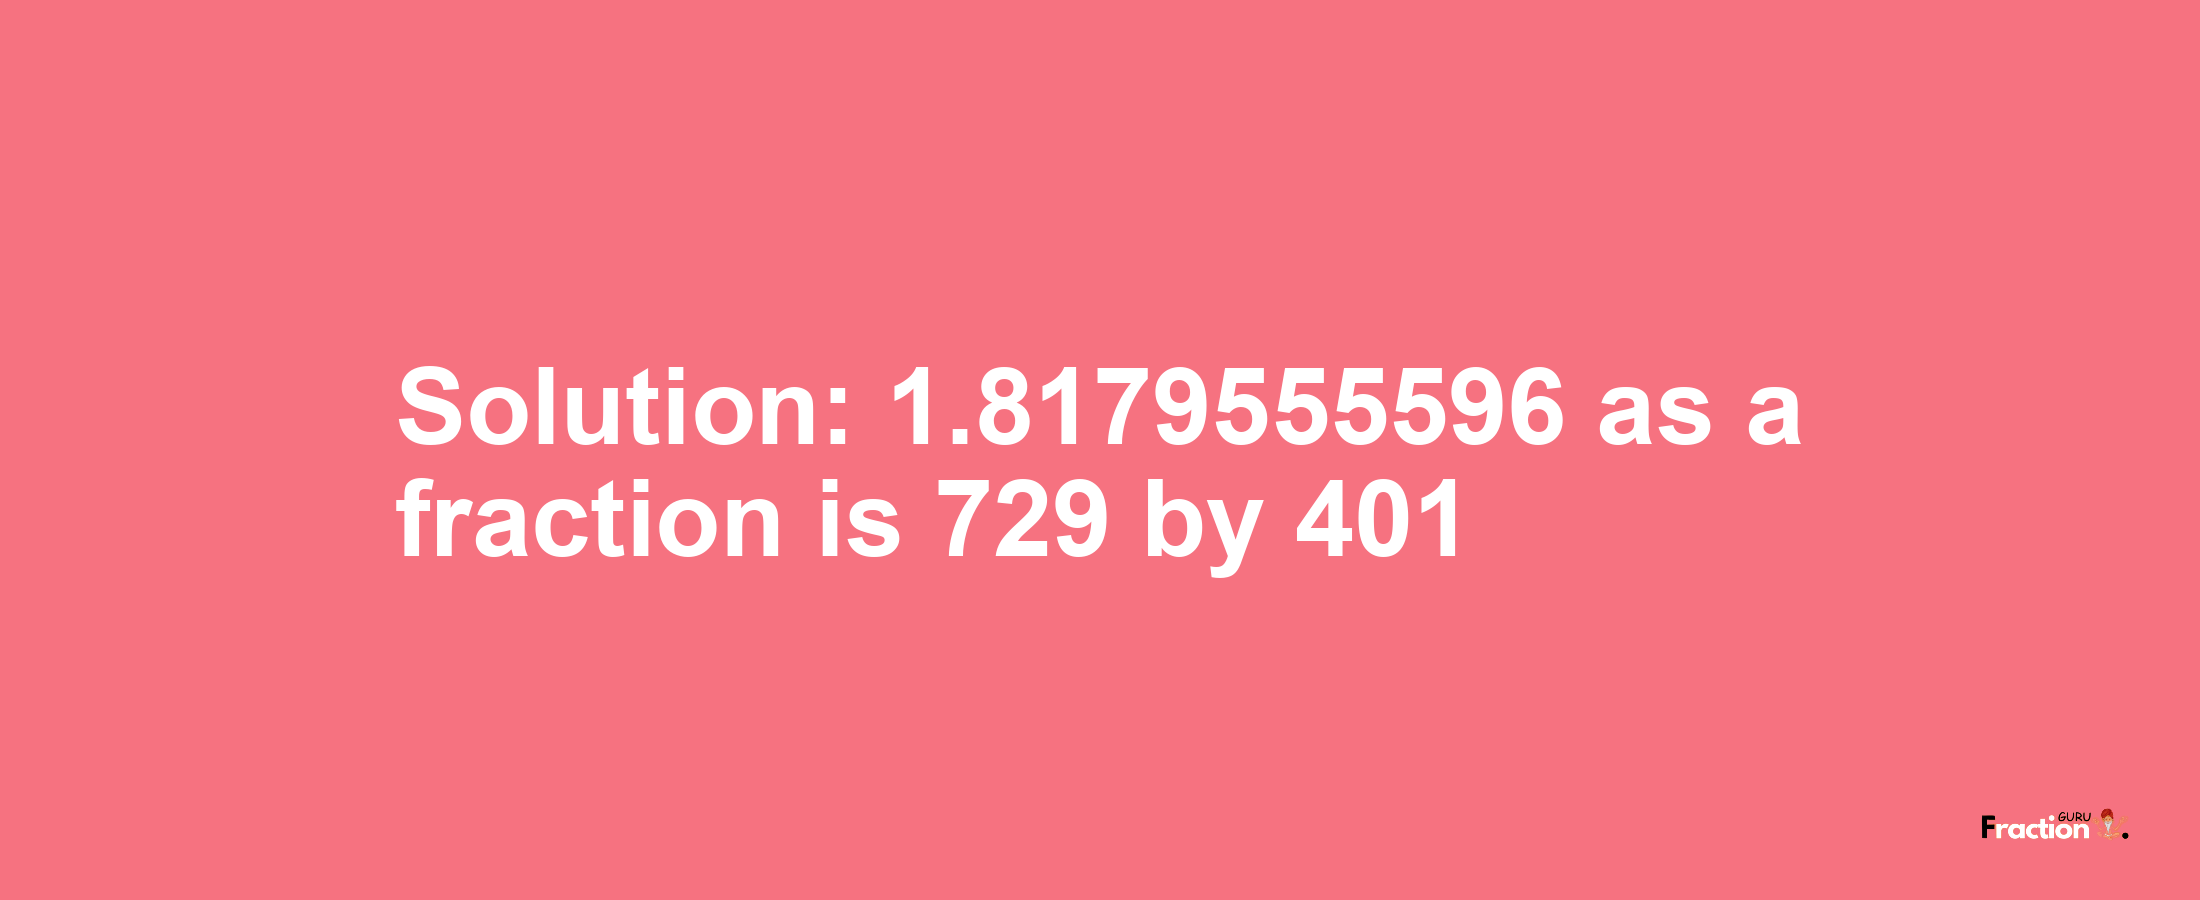 Solution:1.8179555596 as a fraction is 729/401